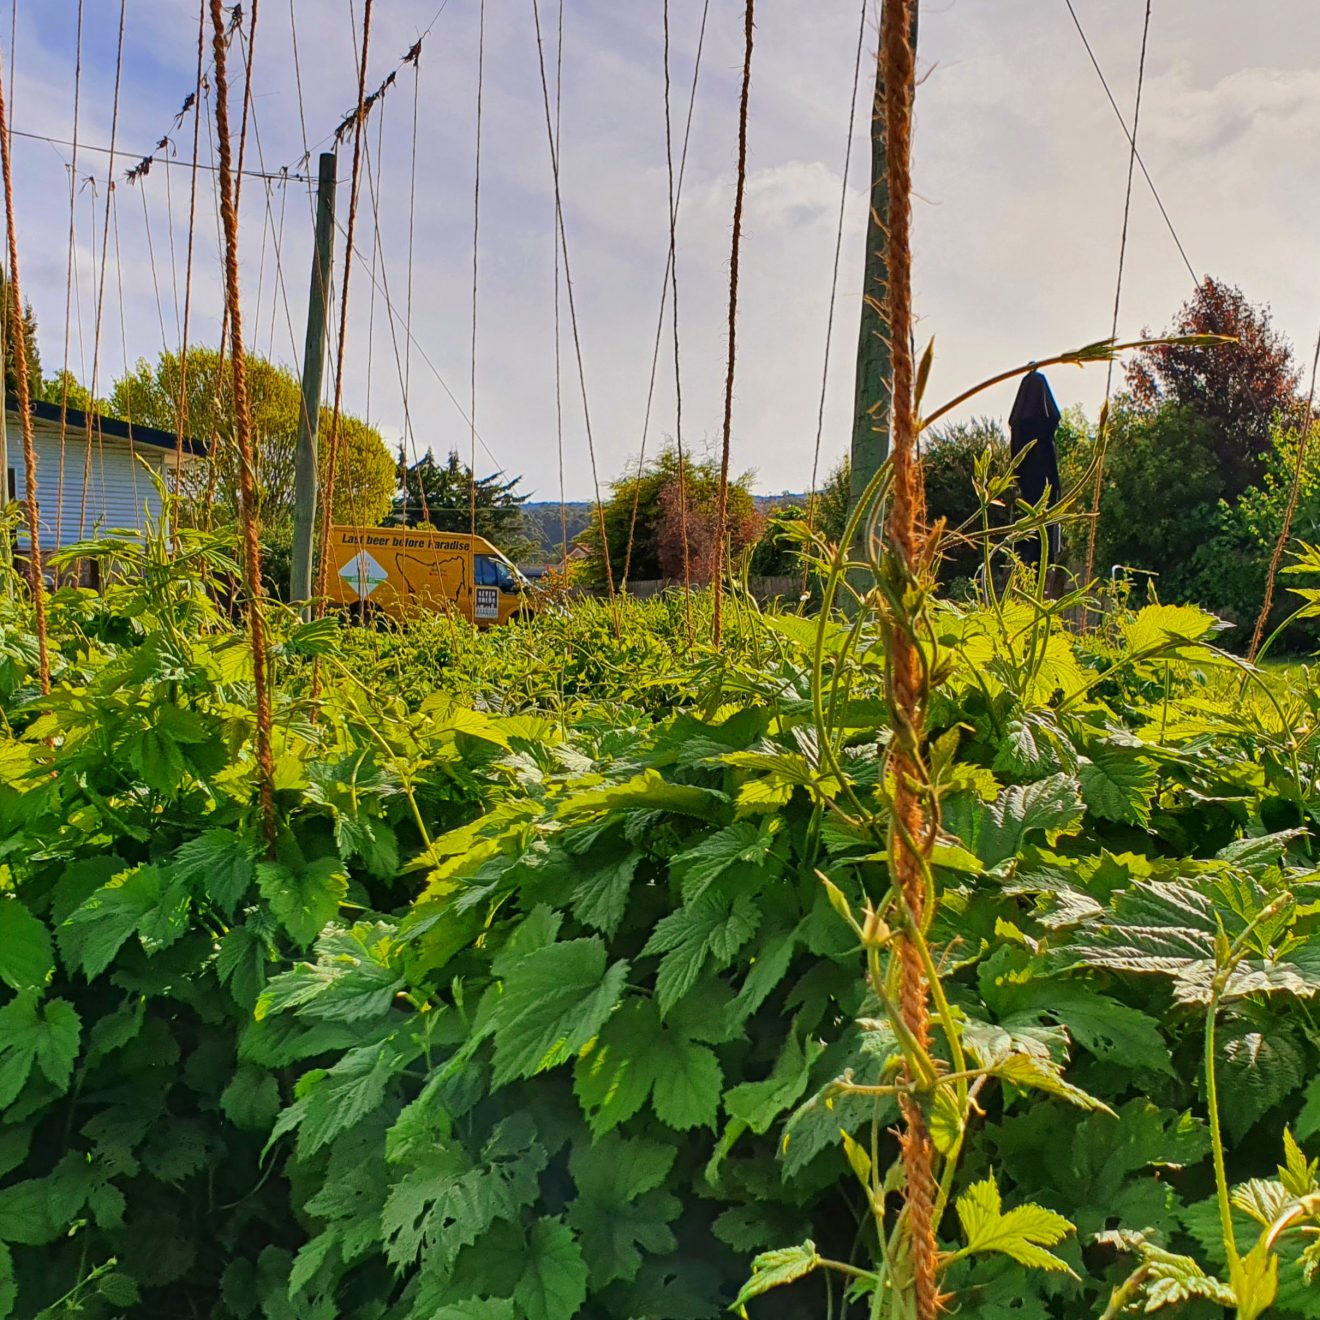 Close up view of bright green hop plants with tendrils climbing up ropes with yellow delivery van in background and overcast skies